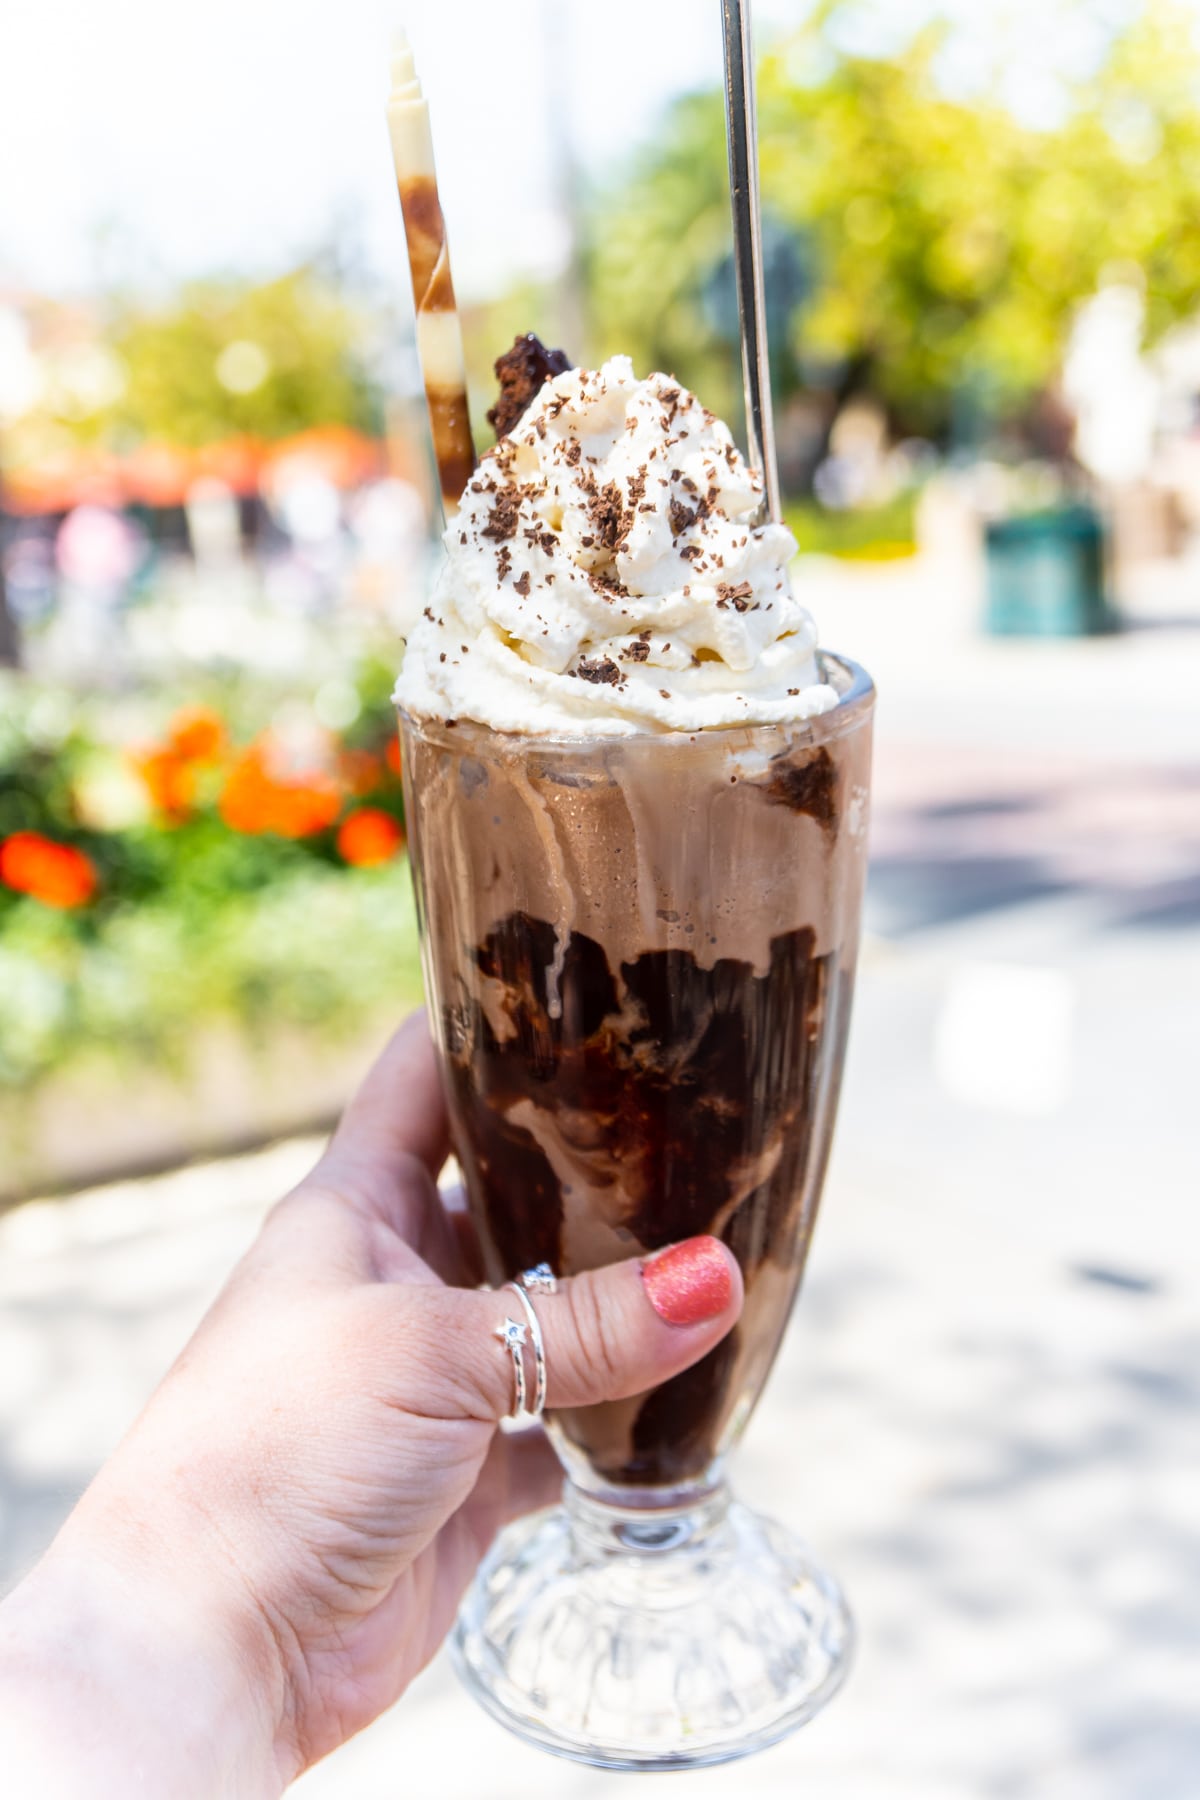 The Best of the Best Disneyland Food   What to Eat and What to Skip - 69